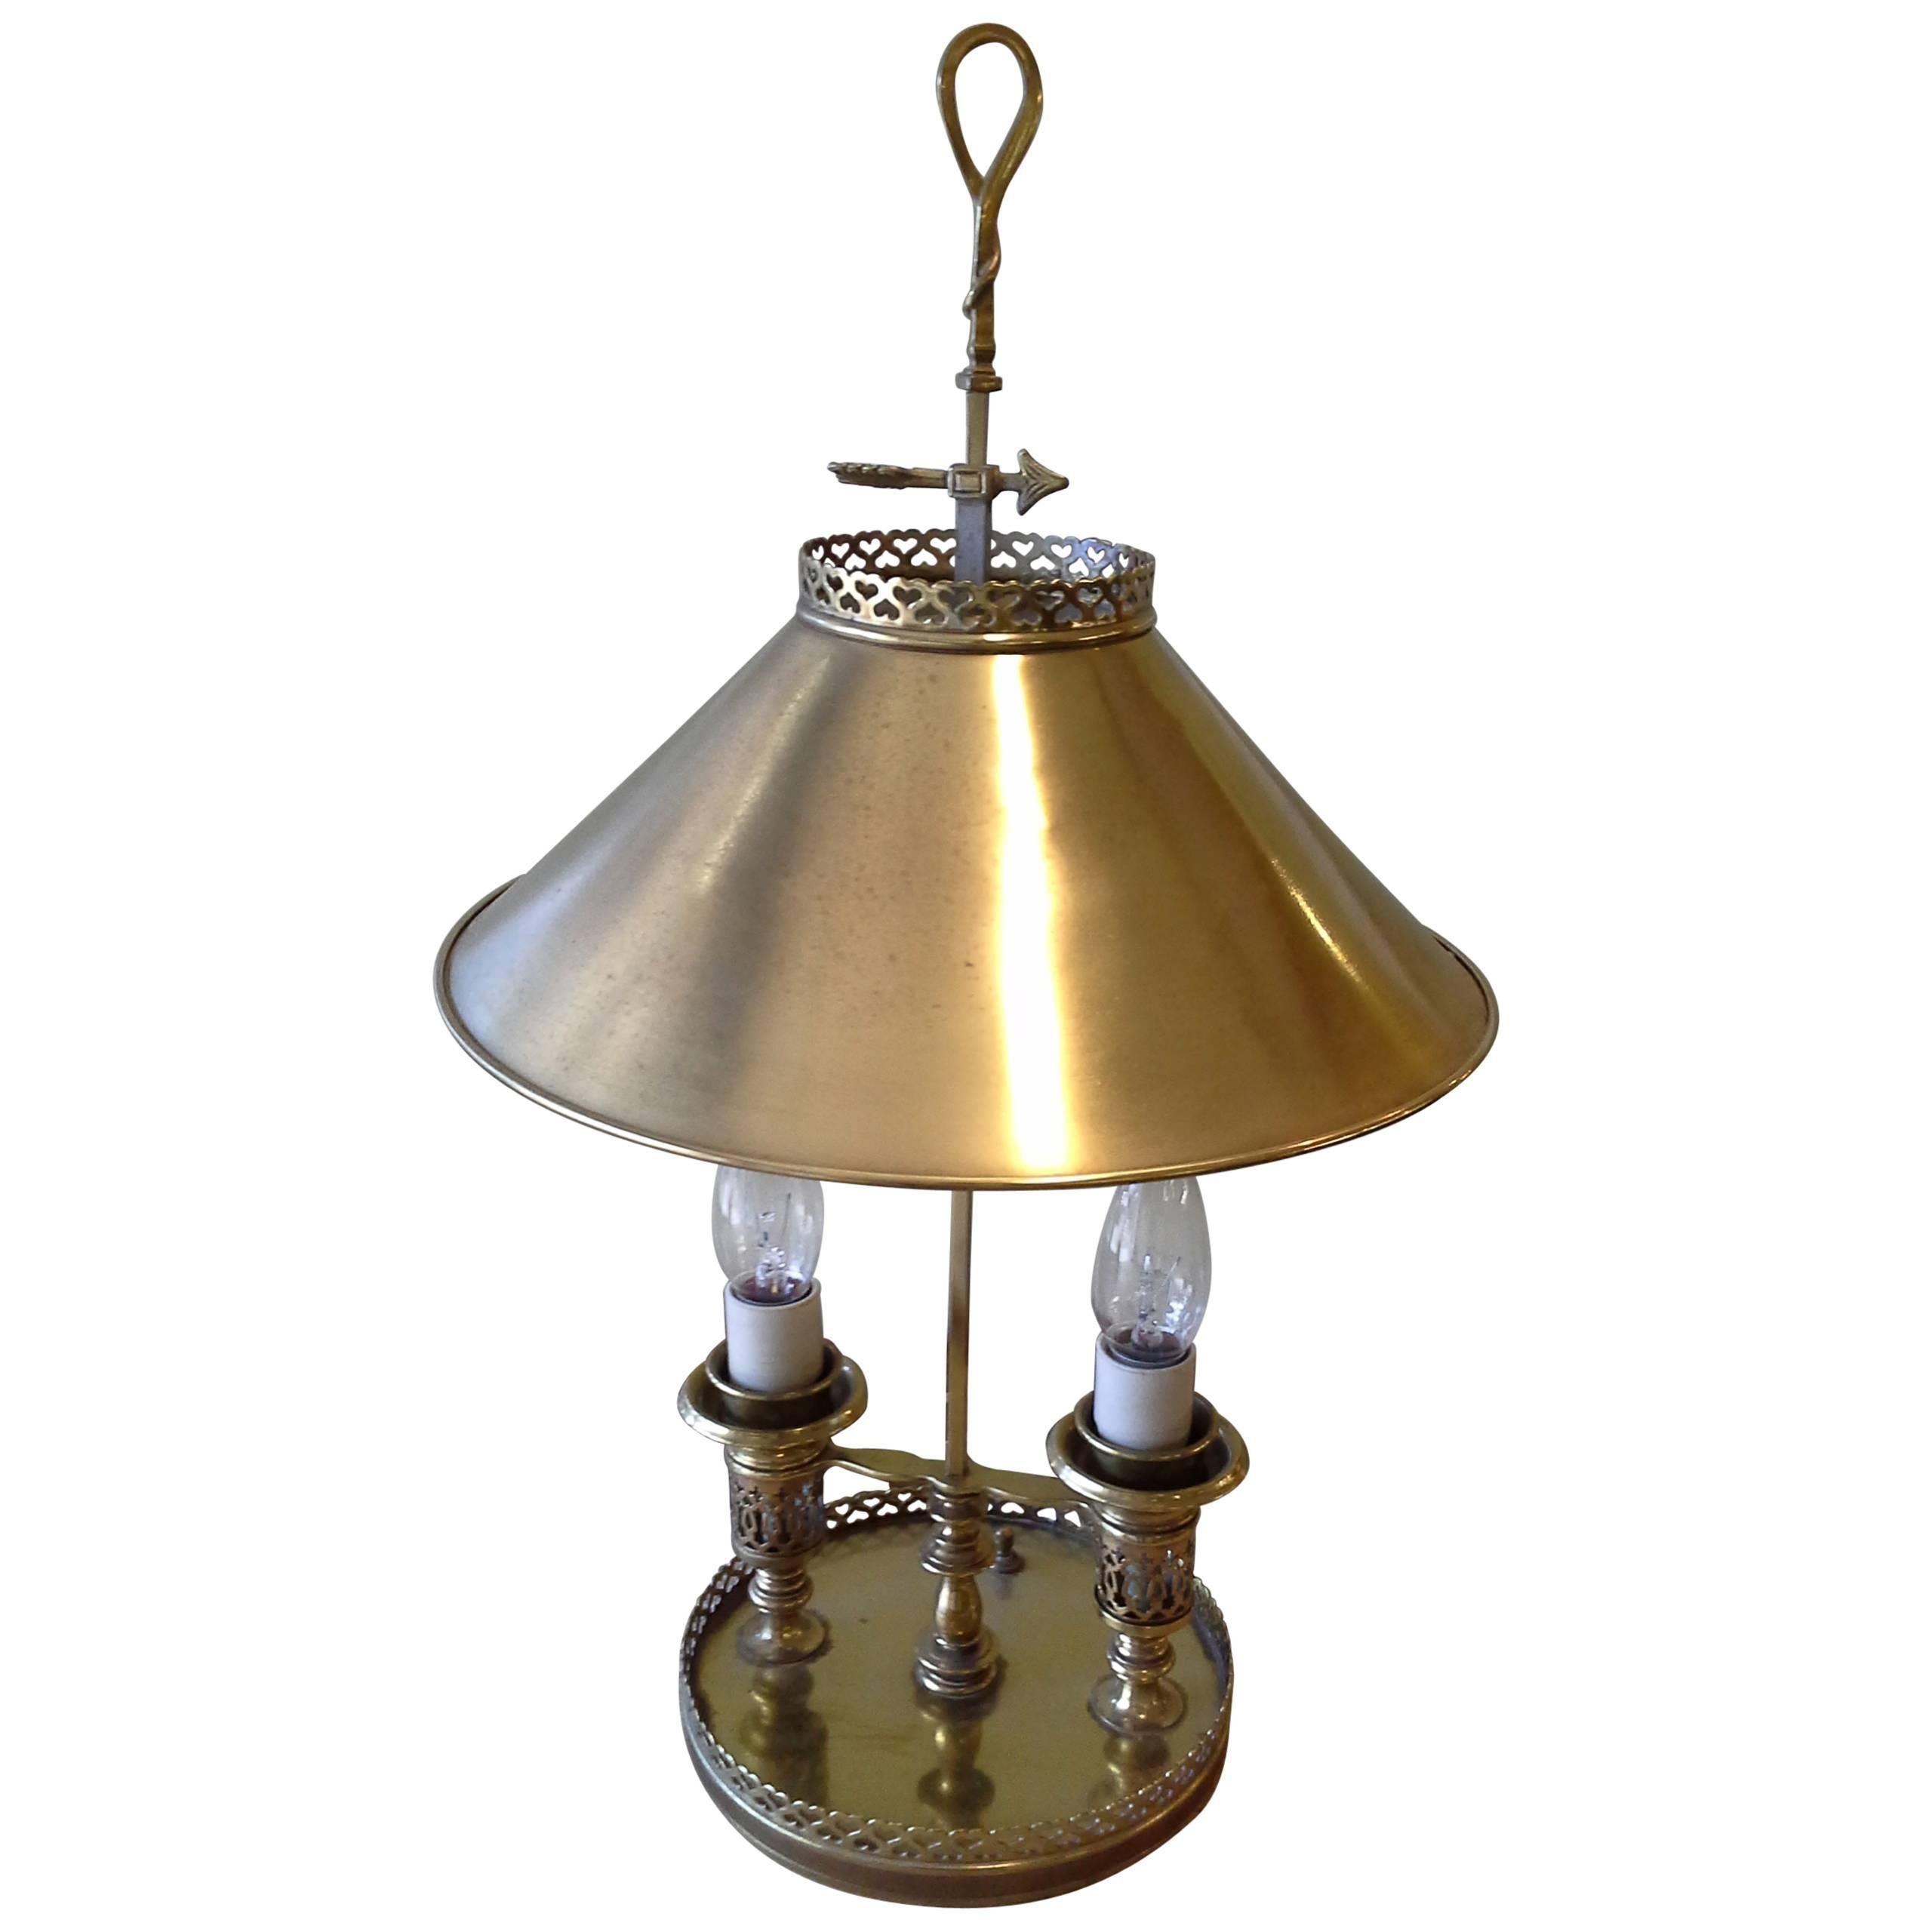 Brass Double Light Desk/Banquet Lamp, Metal Shade Heart Pierced Round Gallery For Sale